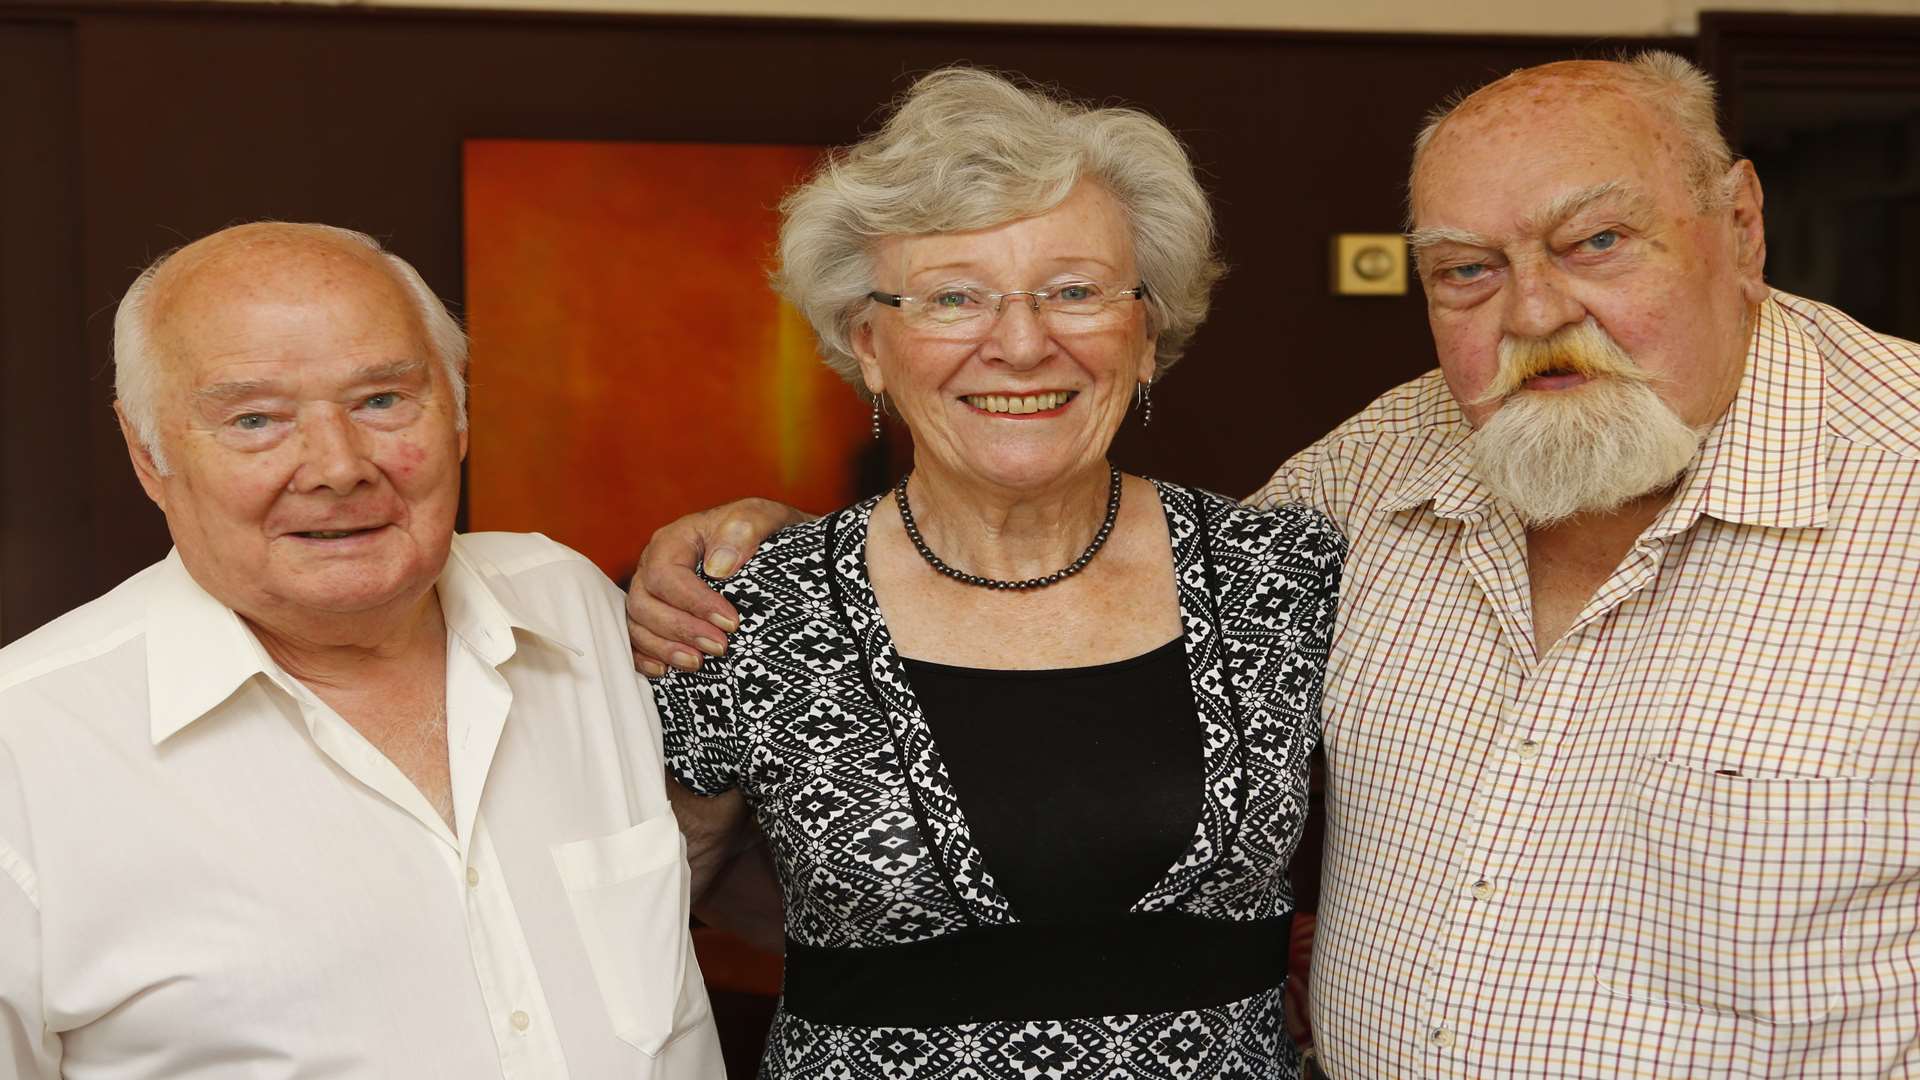 Bob Grant, Audrey Bigley and John Snelgrove, who all went to North Borough School, have met up for the first time in 66 years..